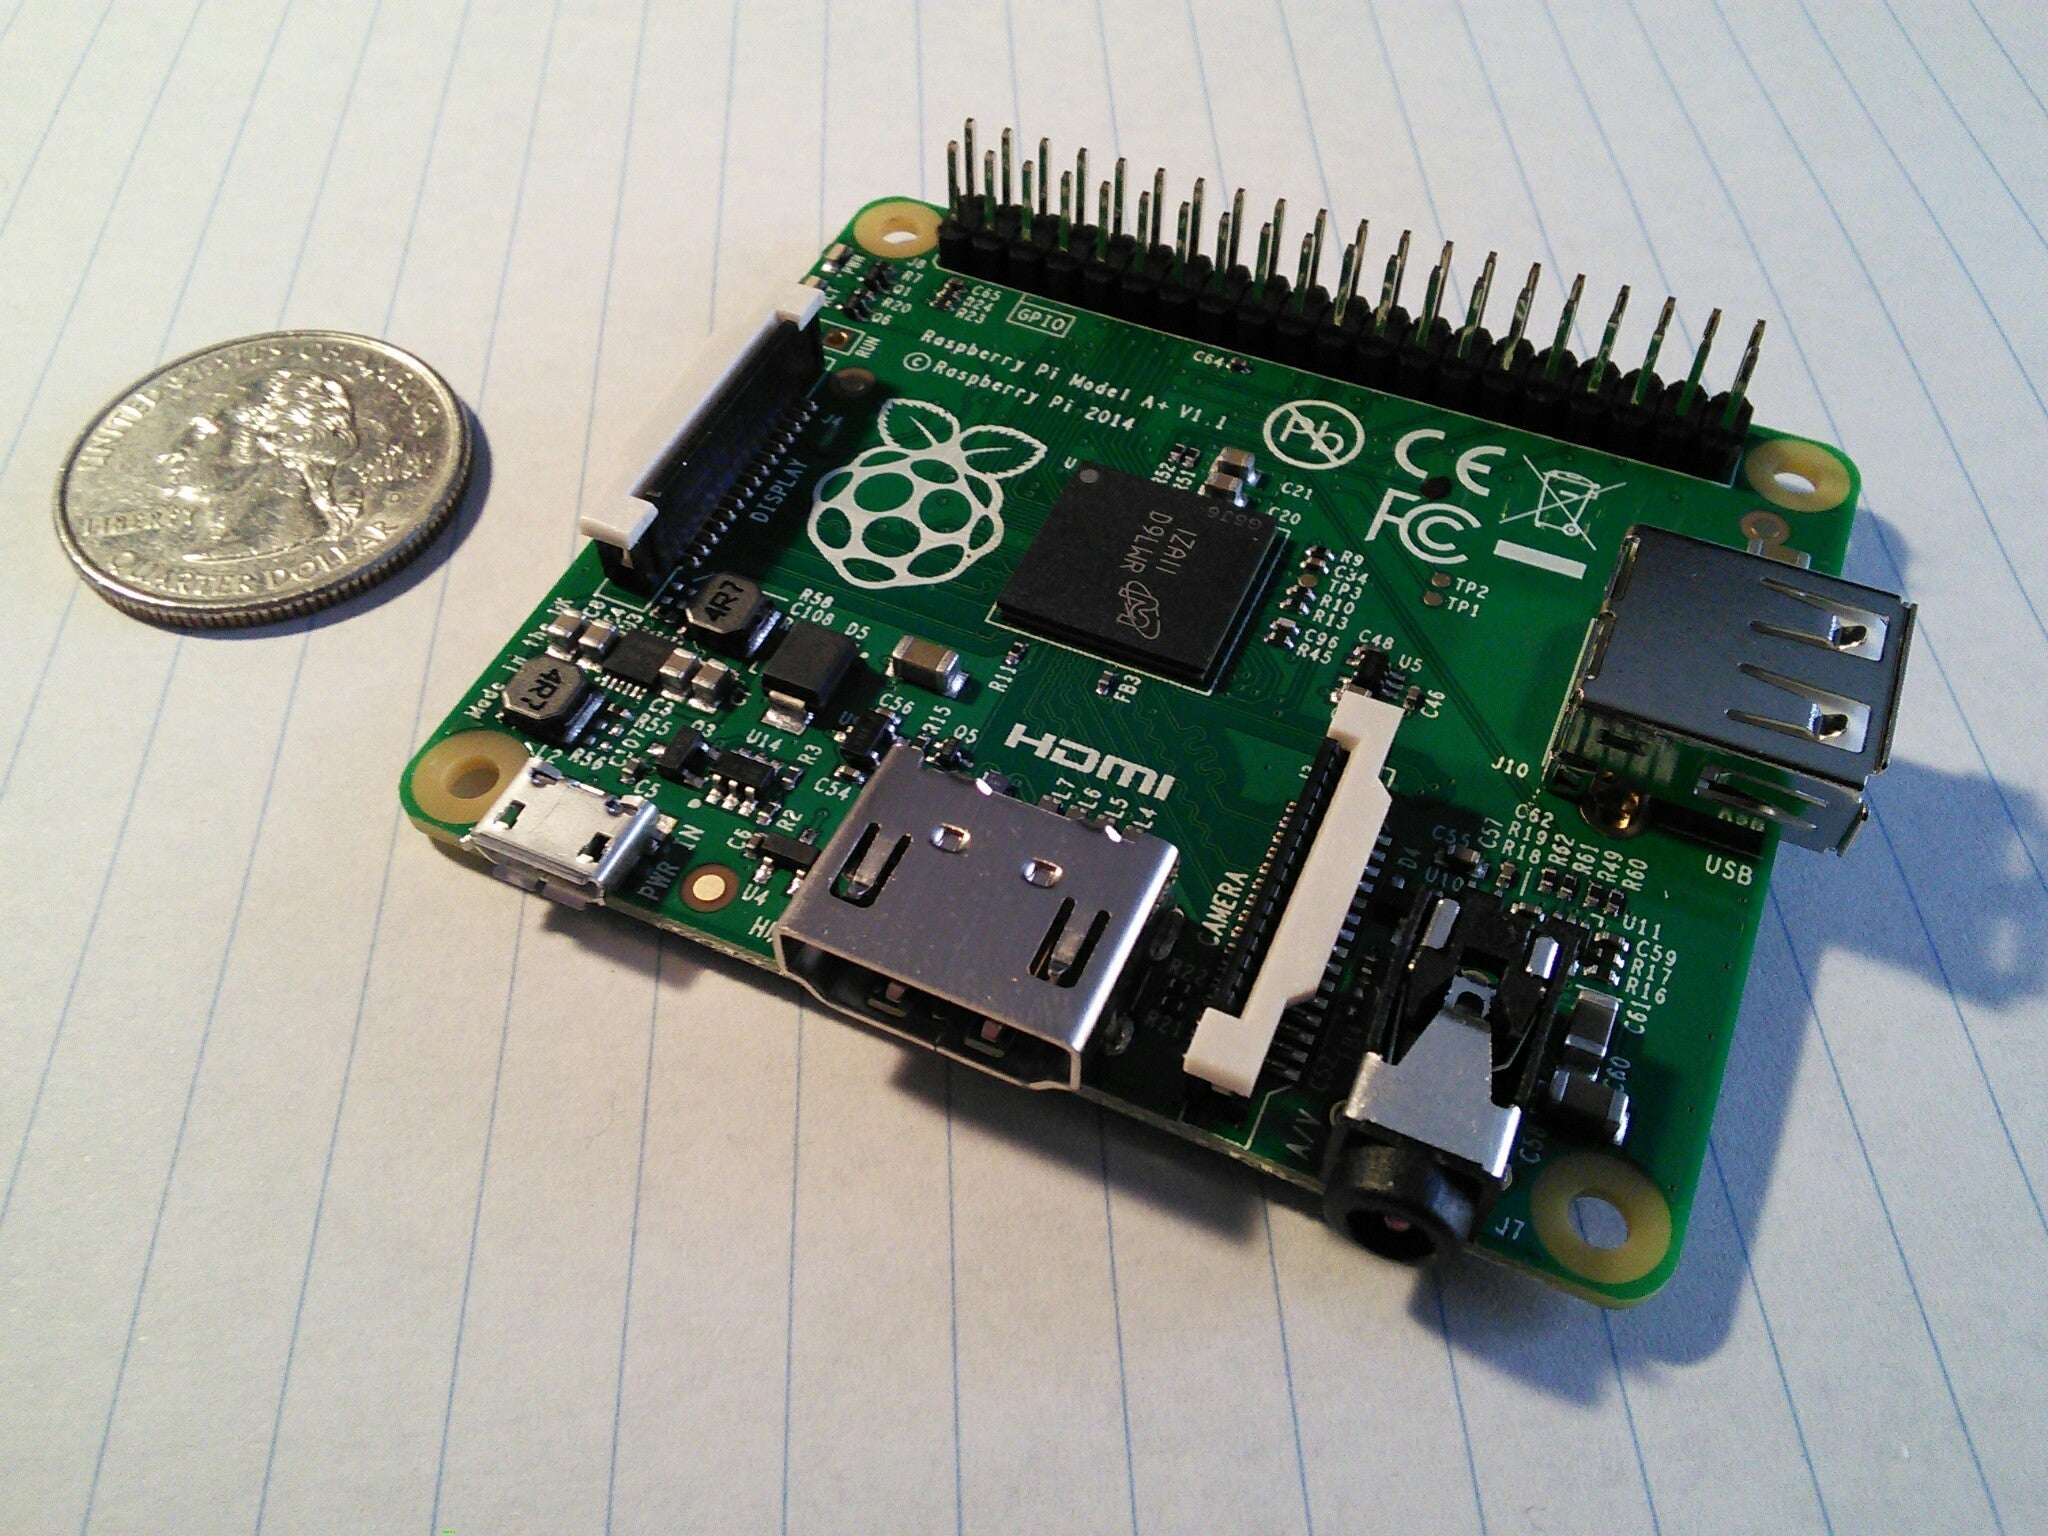 Picture of the Raspberry Pi model A+